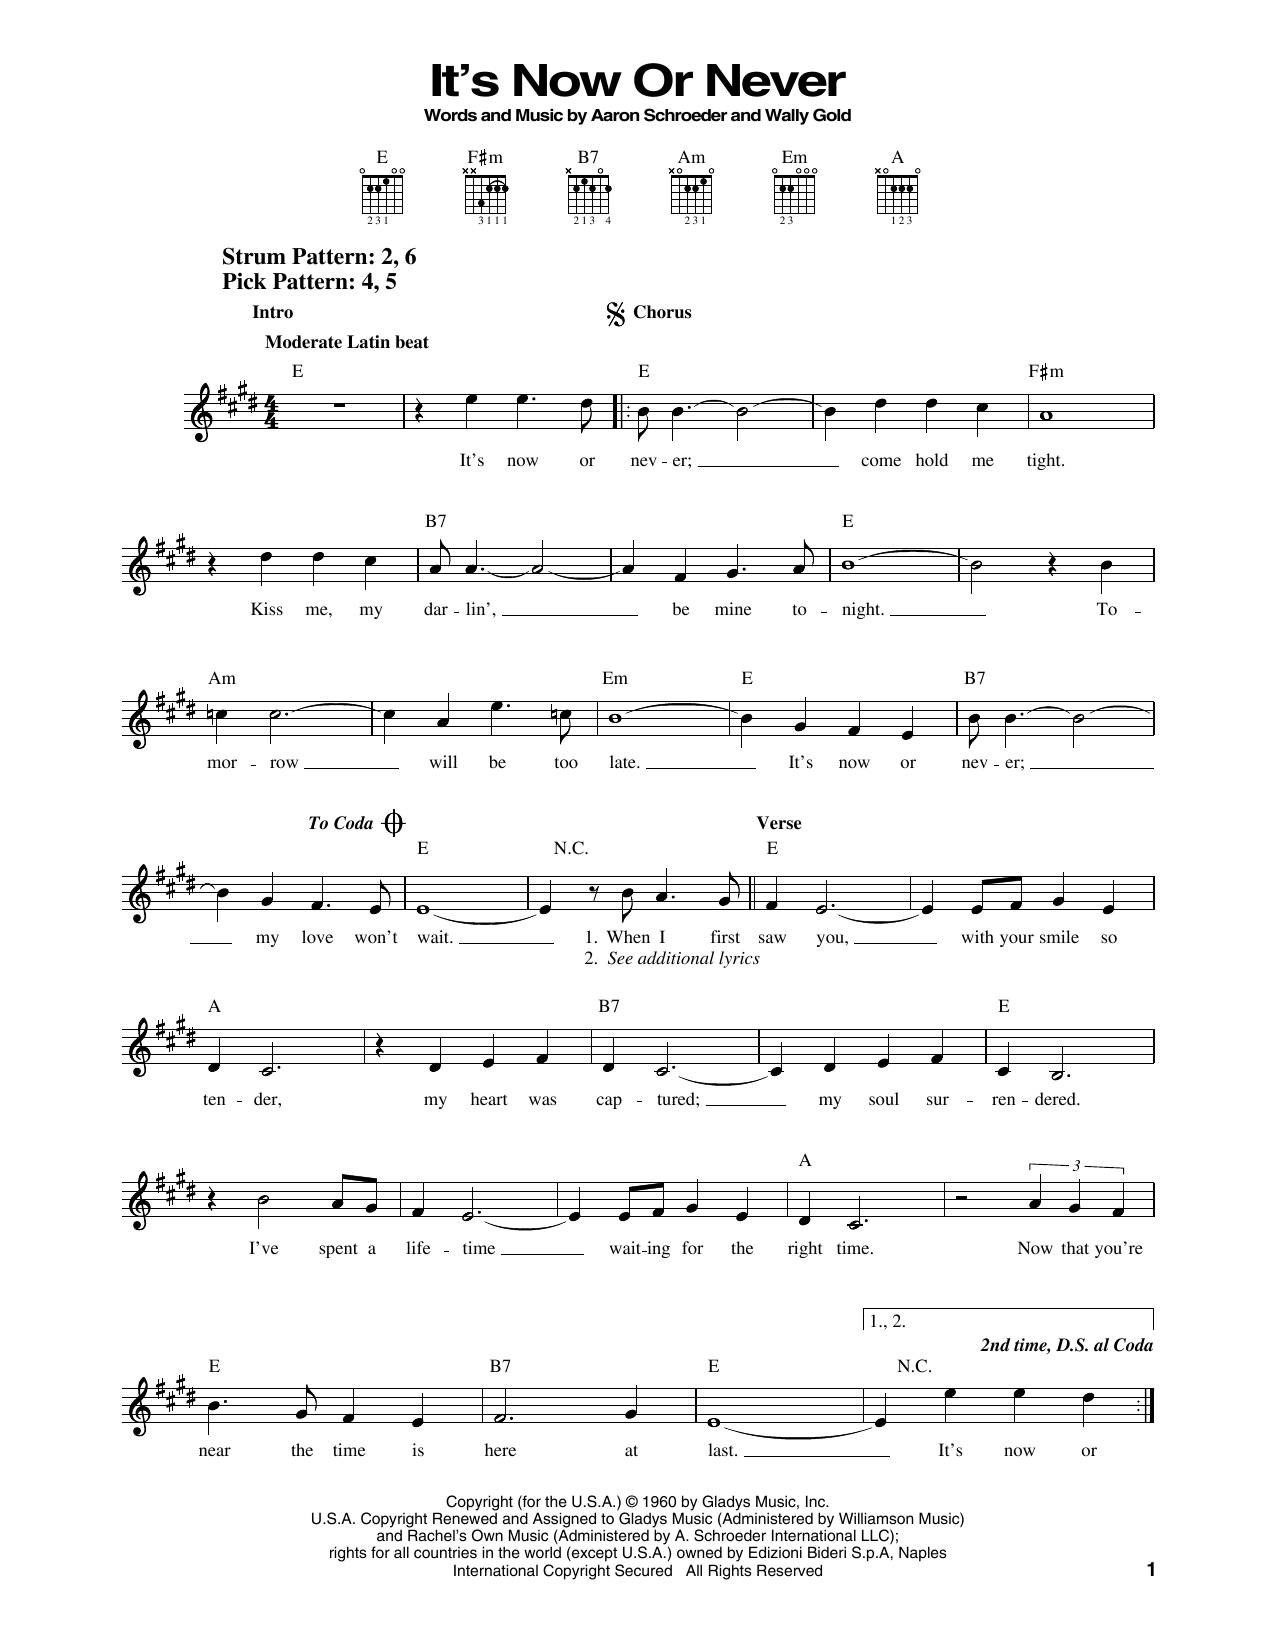 Elvis Presley It's Now Or Never sheet music notes printable PDF score